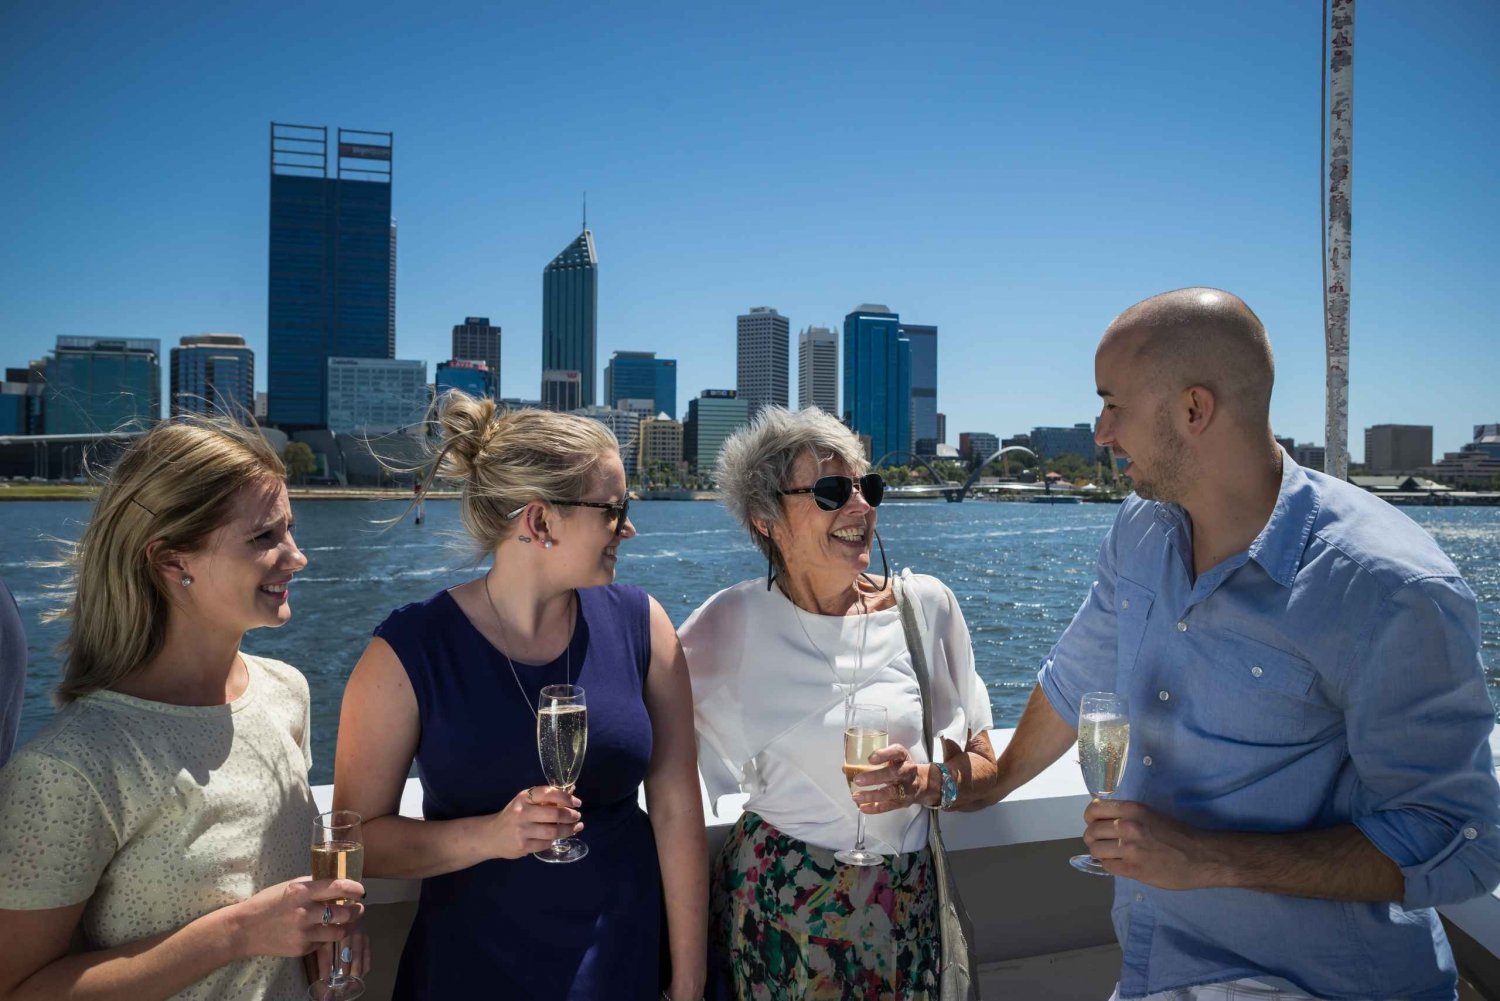 Swan River Lunch Cruise from Fremantle or Perth